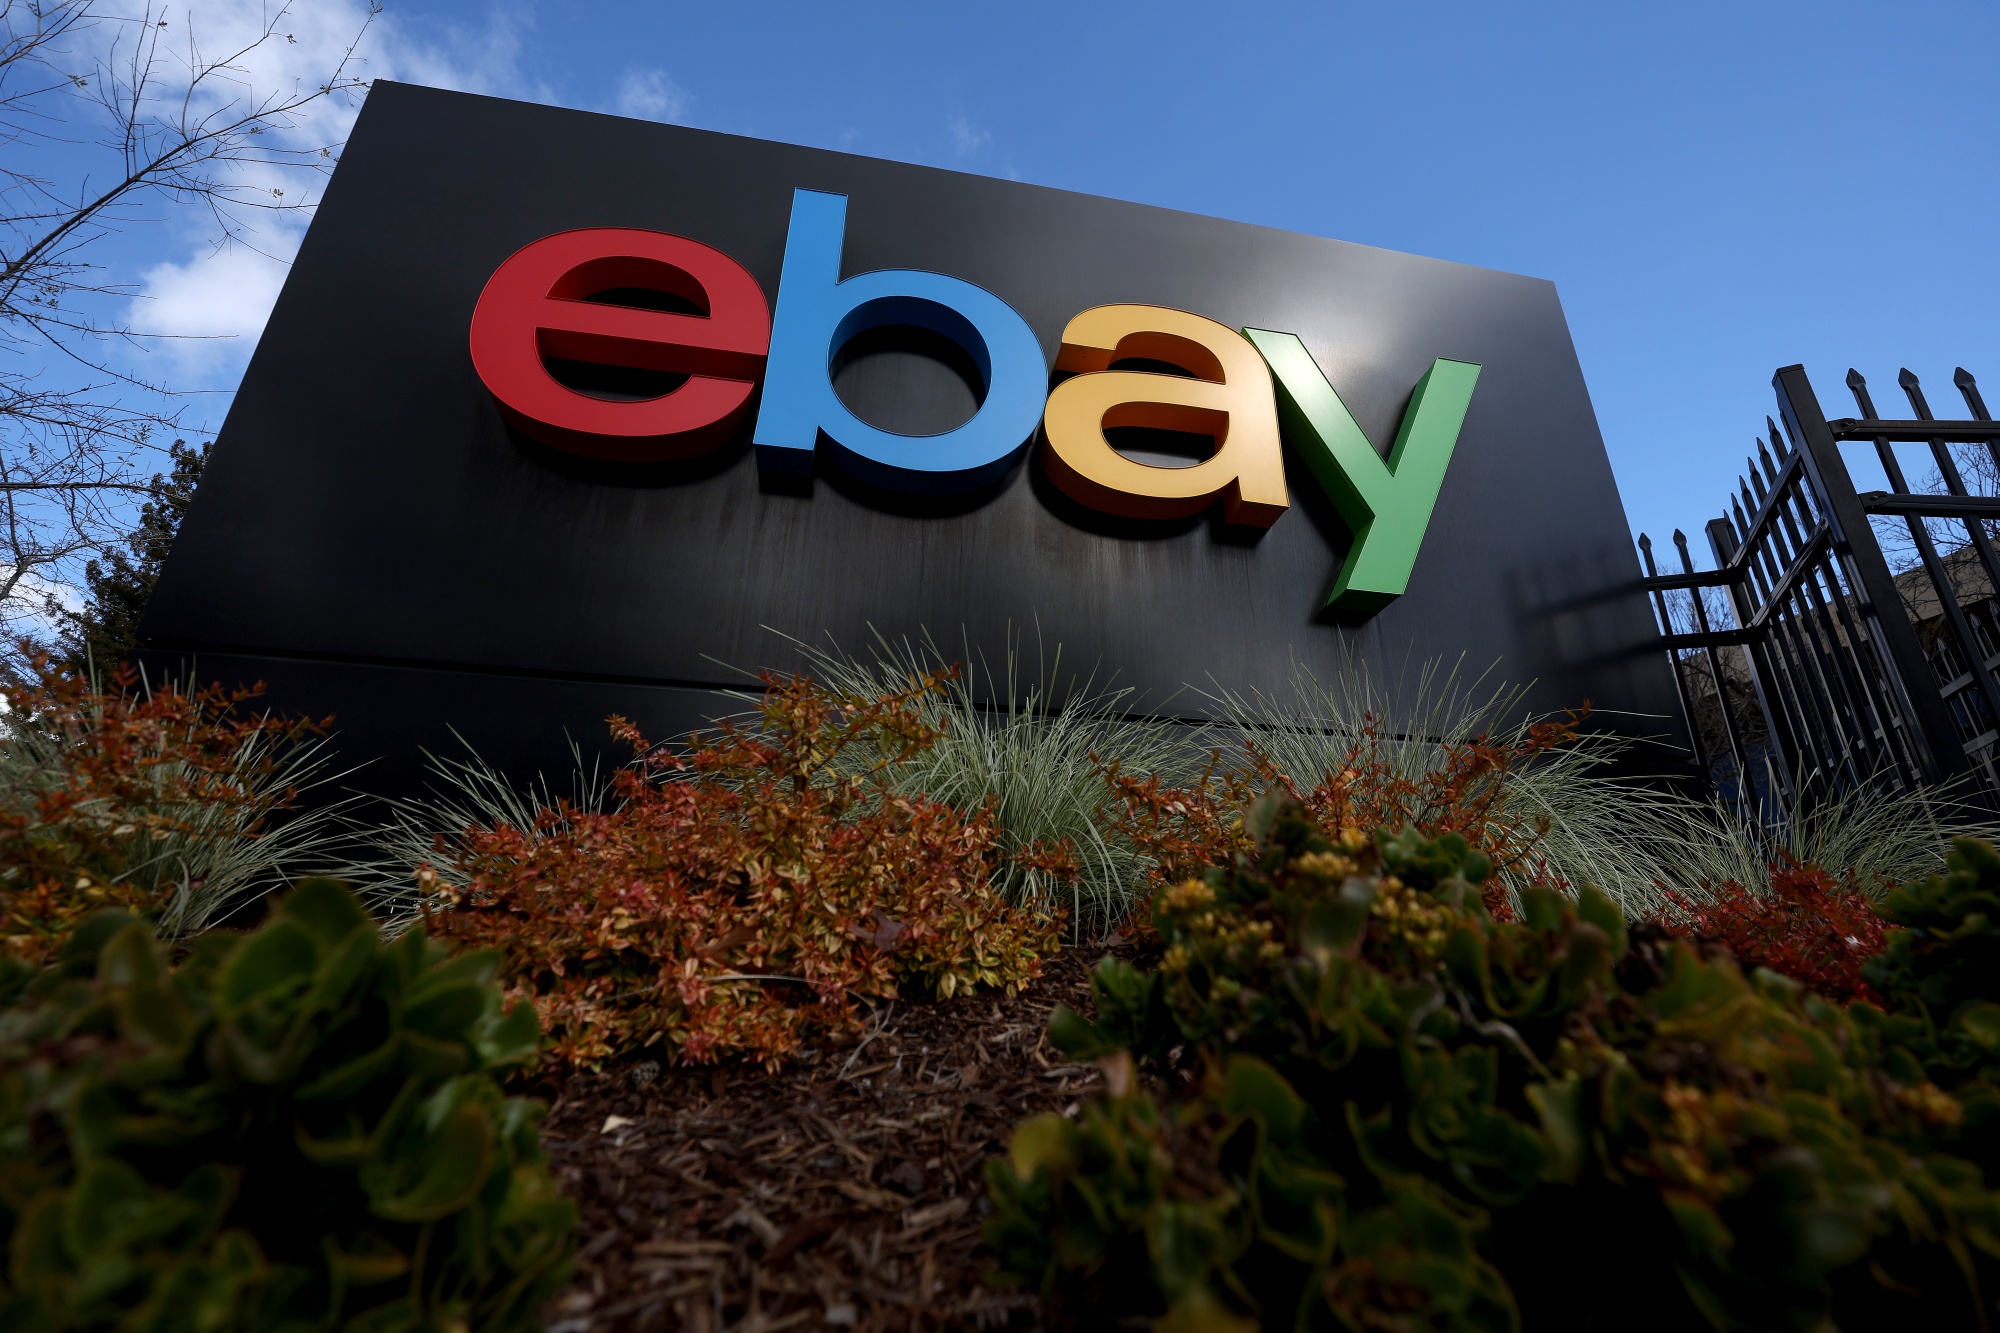 Despite challenges in UK and Germany, eBay forecasts strong Q1 performance (Credits: Bloomberg)